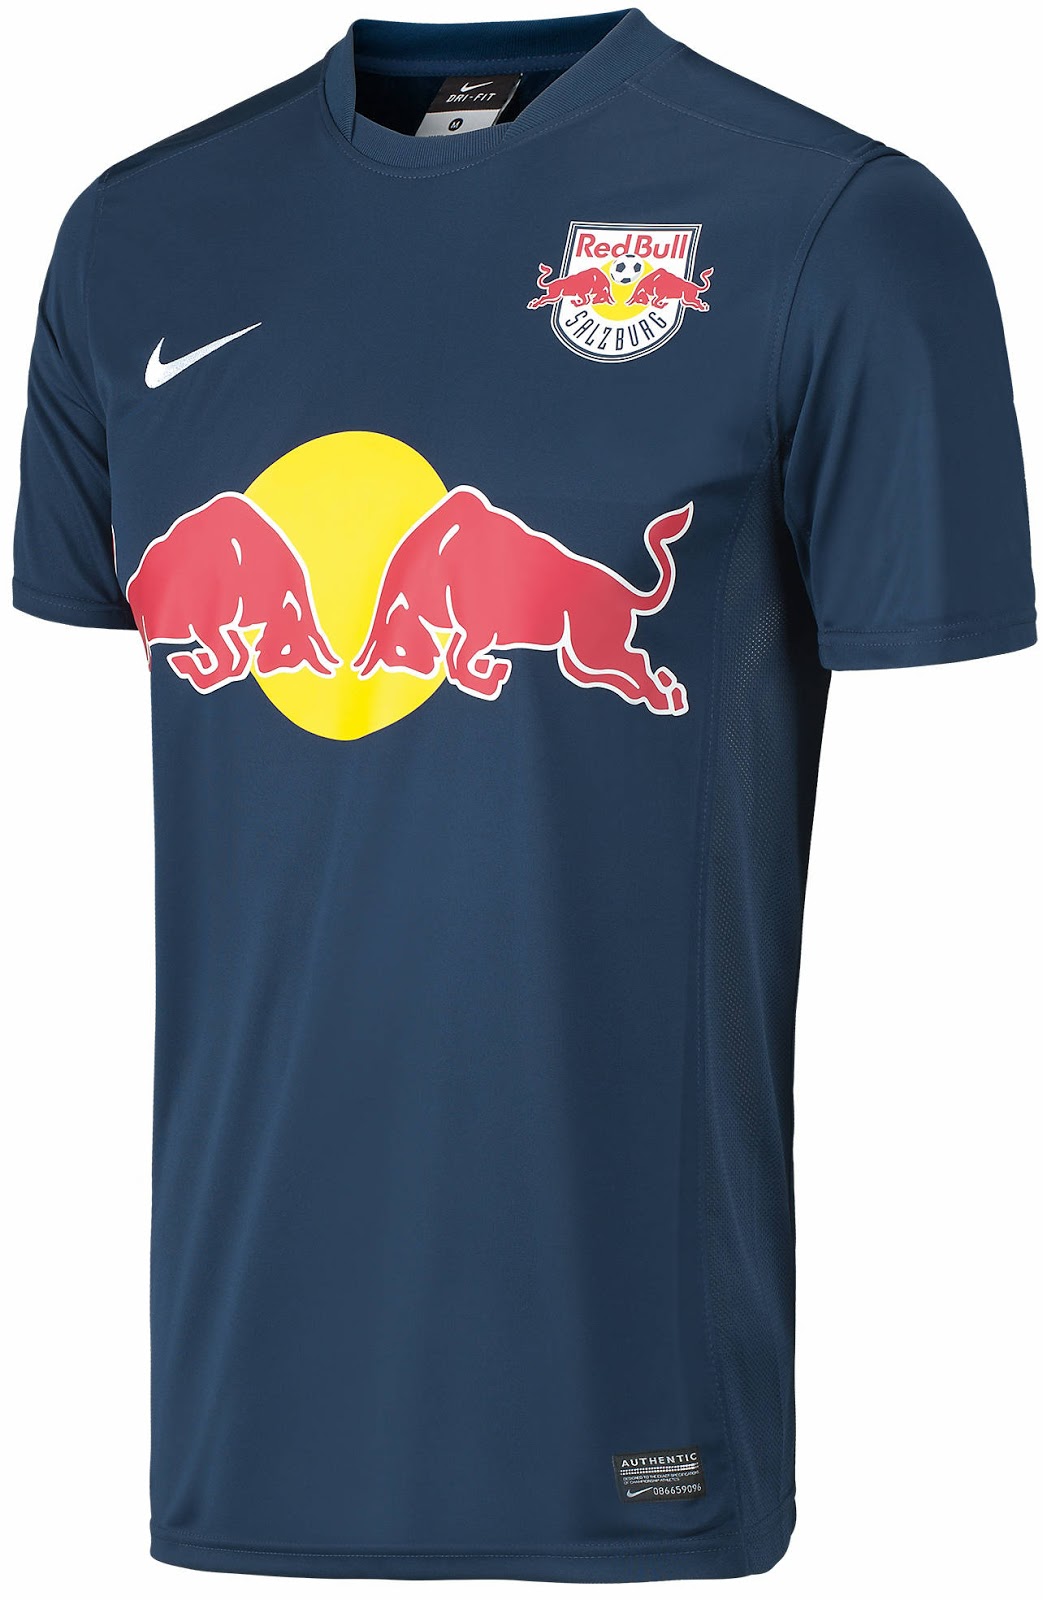 Red Bull Salzburg 14-15 Home and Away Kits Released - Footy Headlines